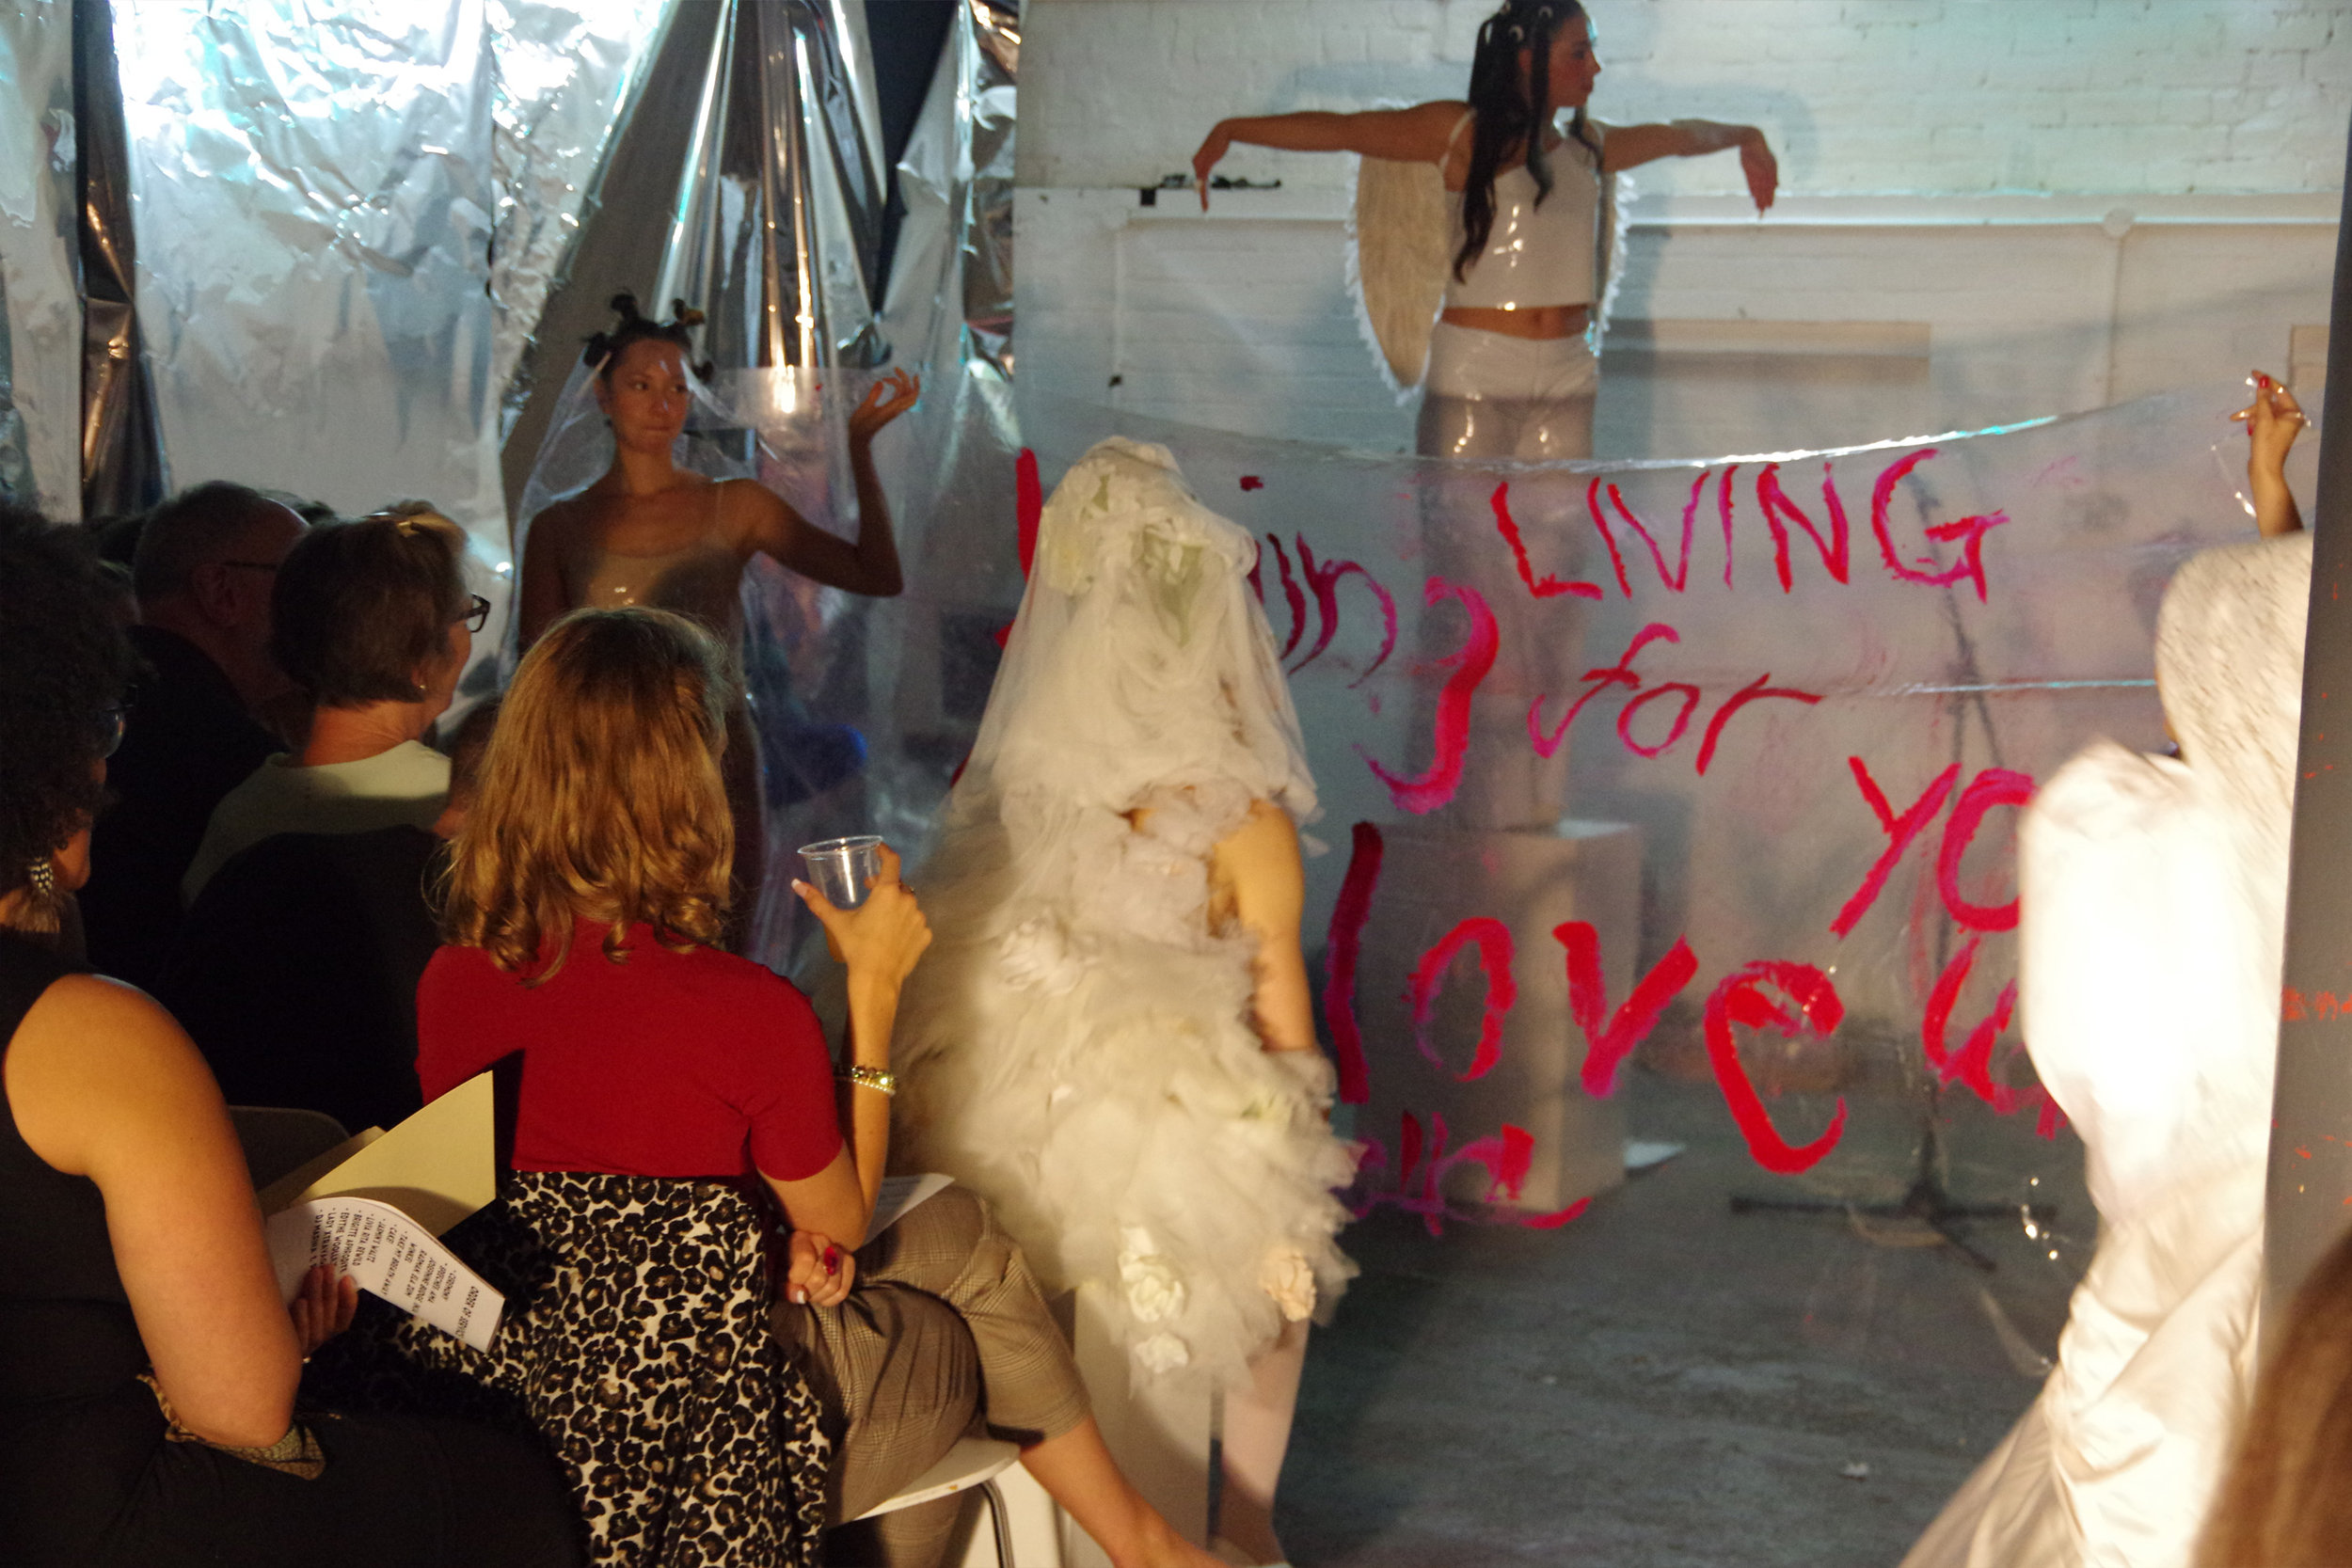 brexit wedding, live art, performance, liviarita, london, subculture, underground, pop, theatre, experimental, contemporary, arts, performance art, crazyiness, youth, art project